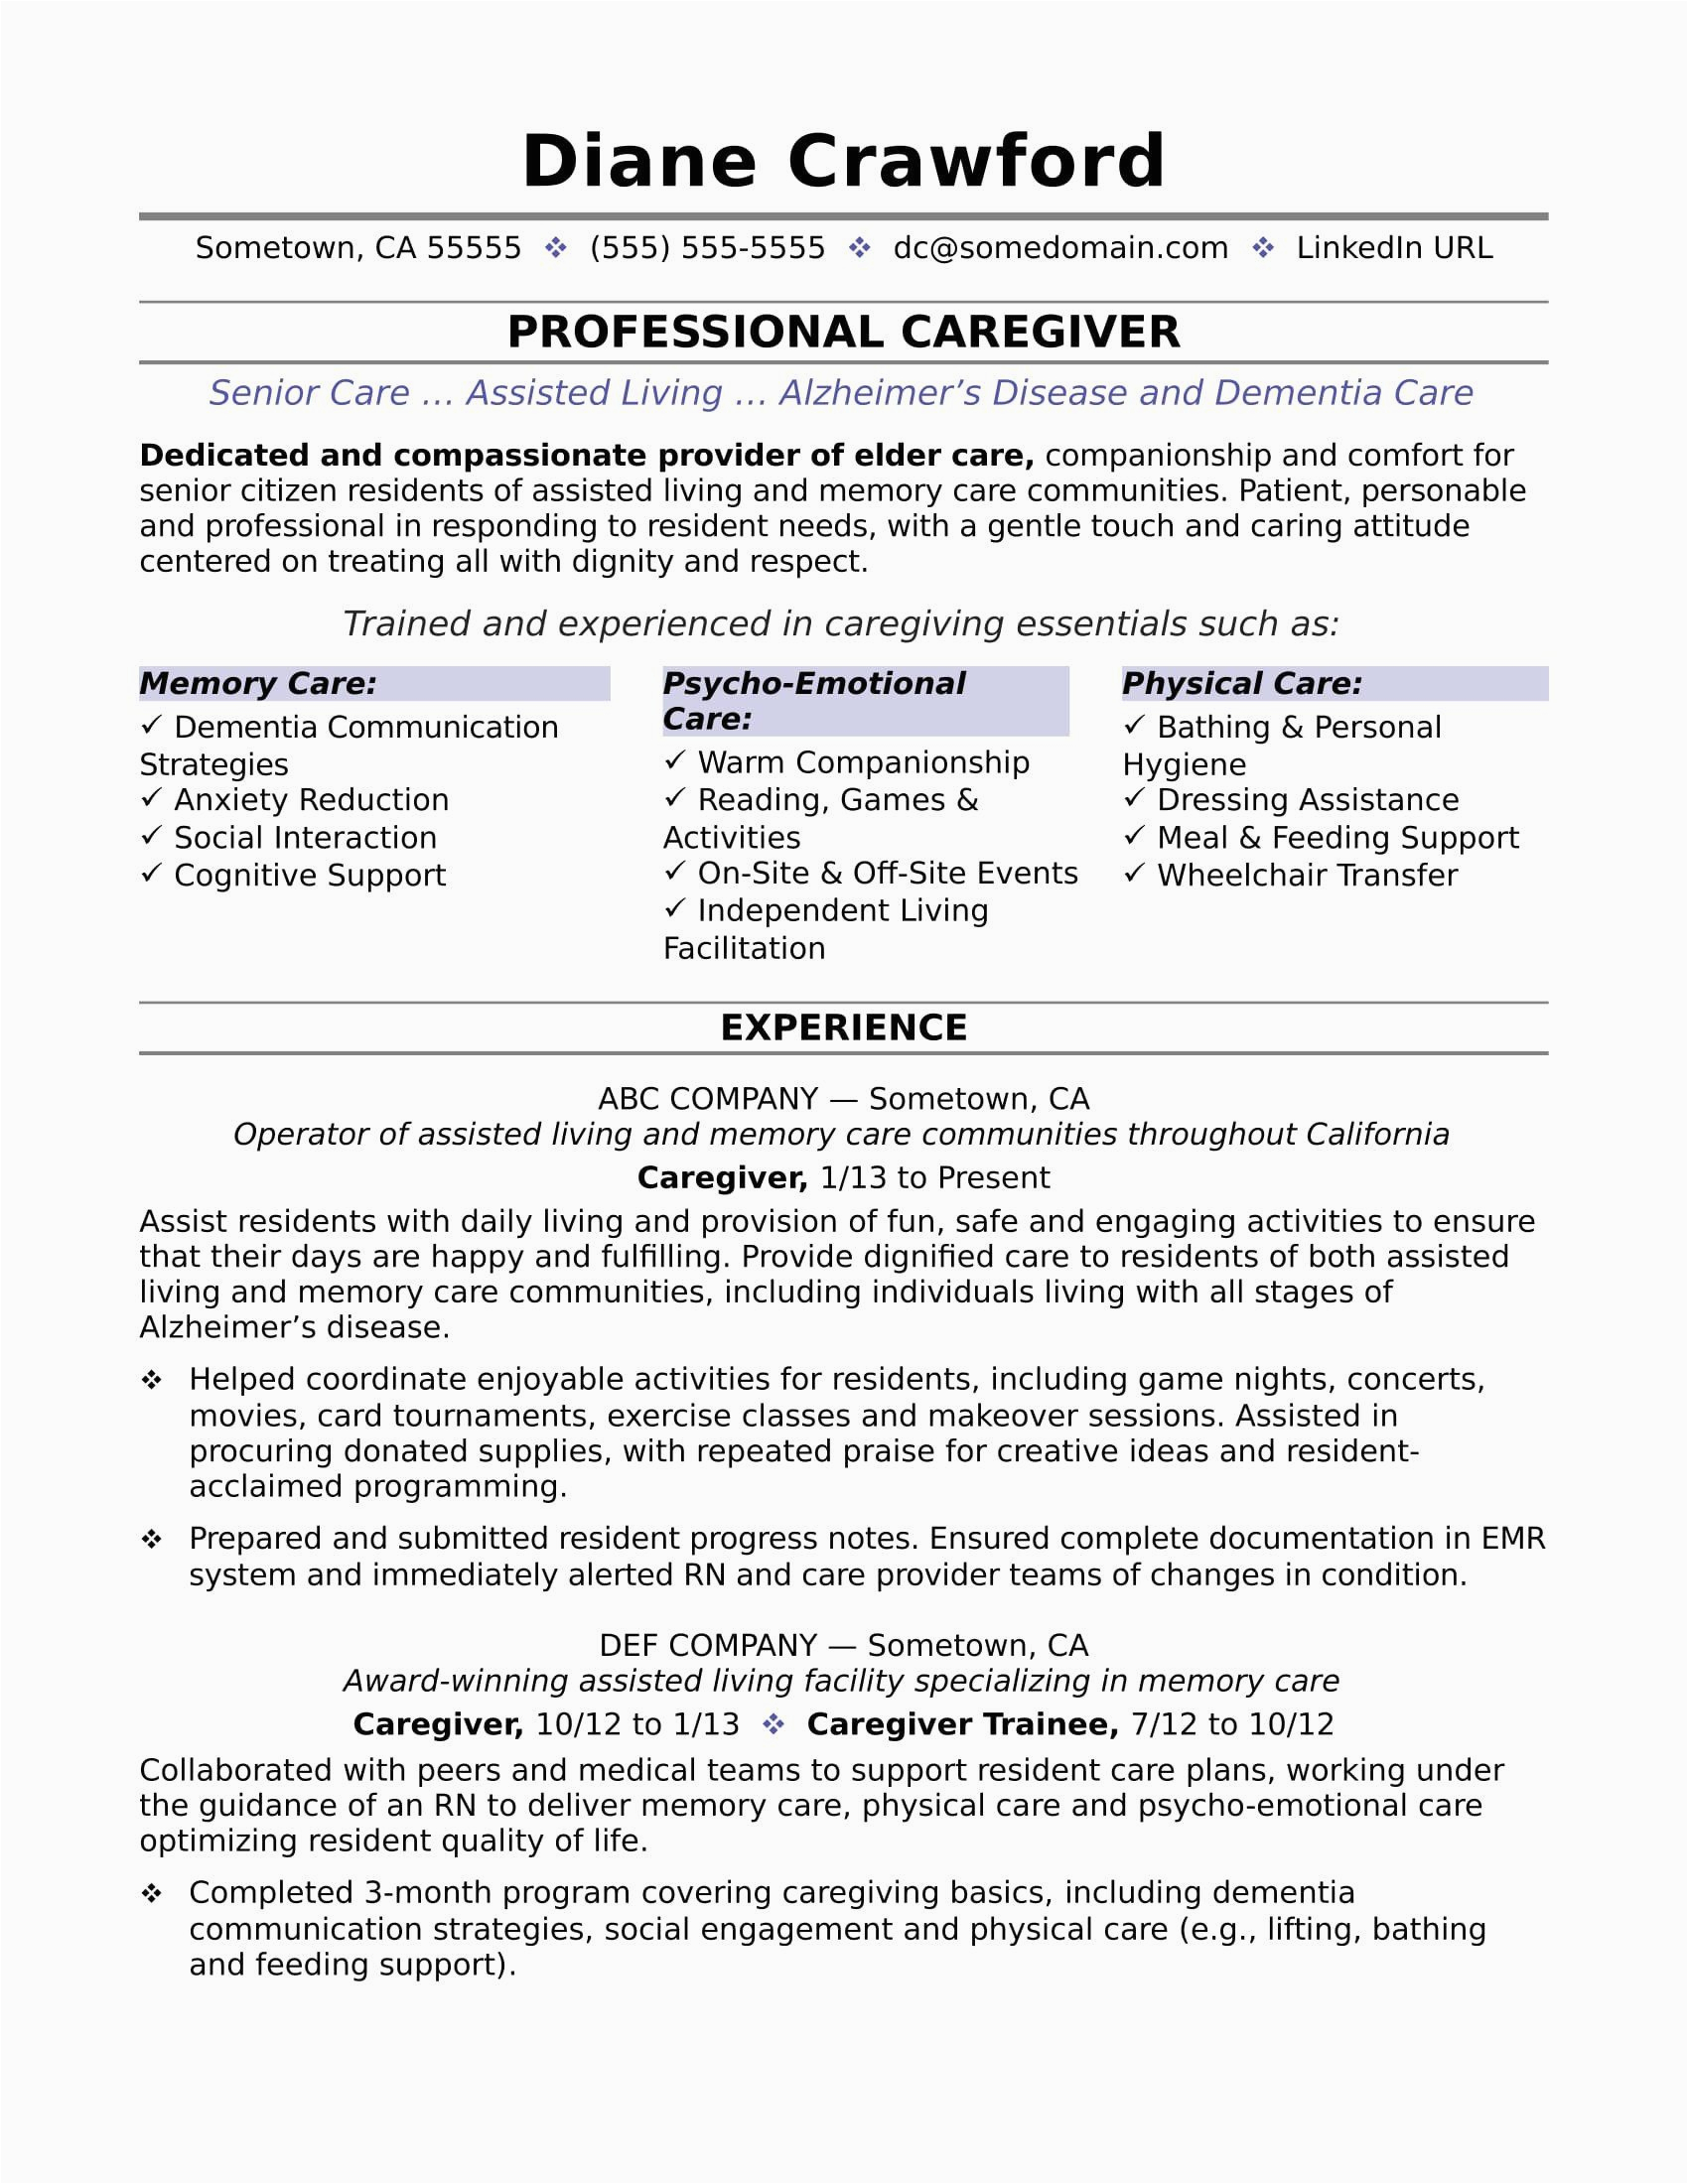 Sample Resume for Aged Care Worker with No Experience Caregiver Resume No Experience New Caregiver Resume Sample